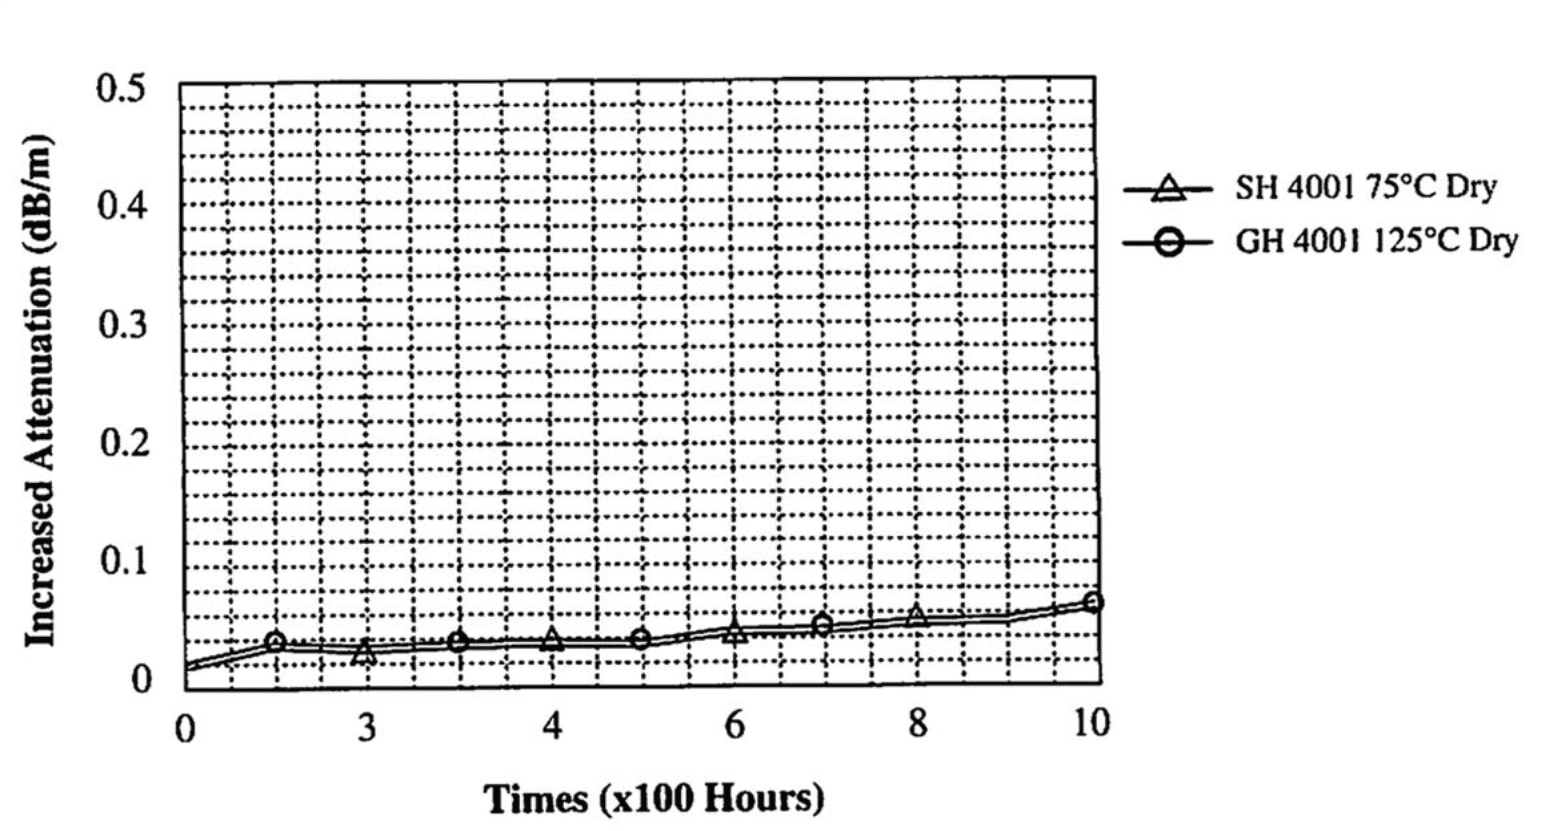 Attenuation change over time, at 75°C (SH-4001) and 125°C (GH-4001)